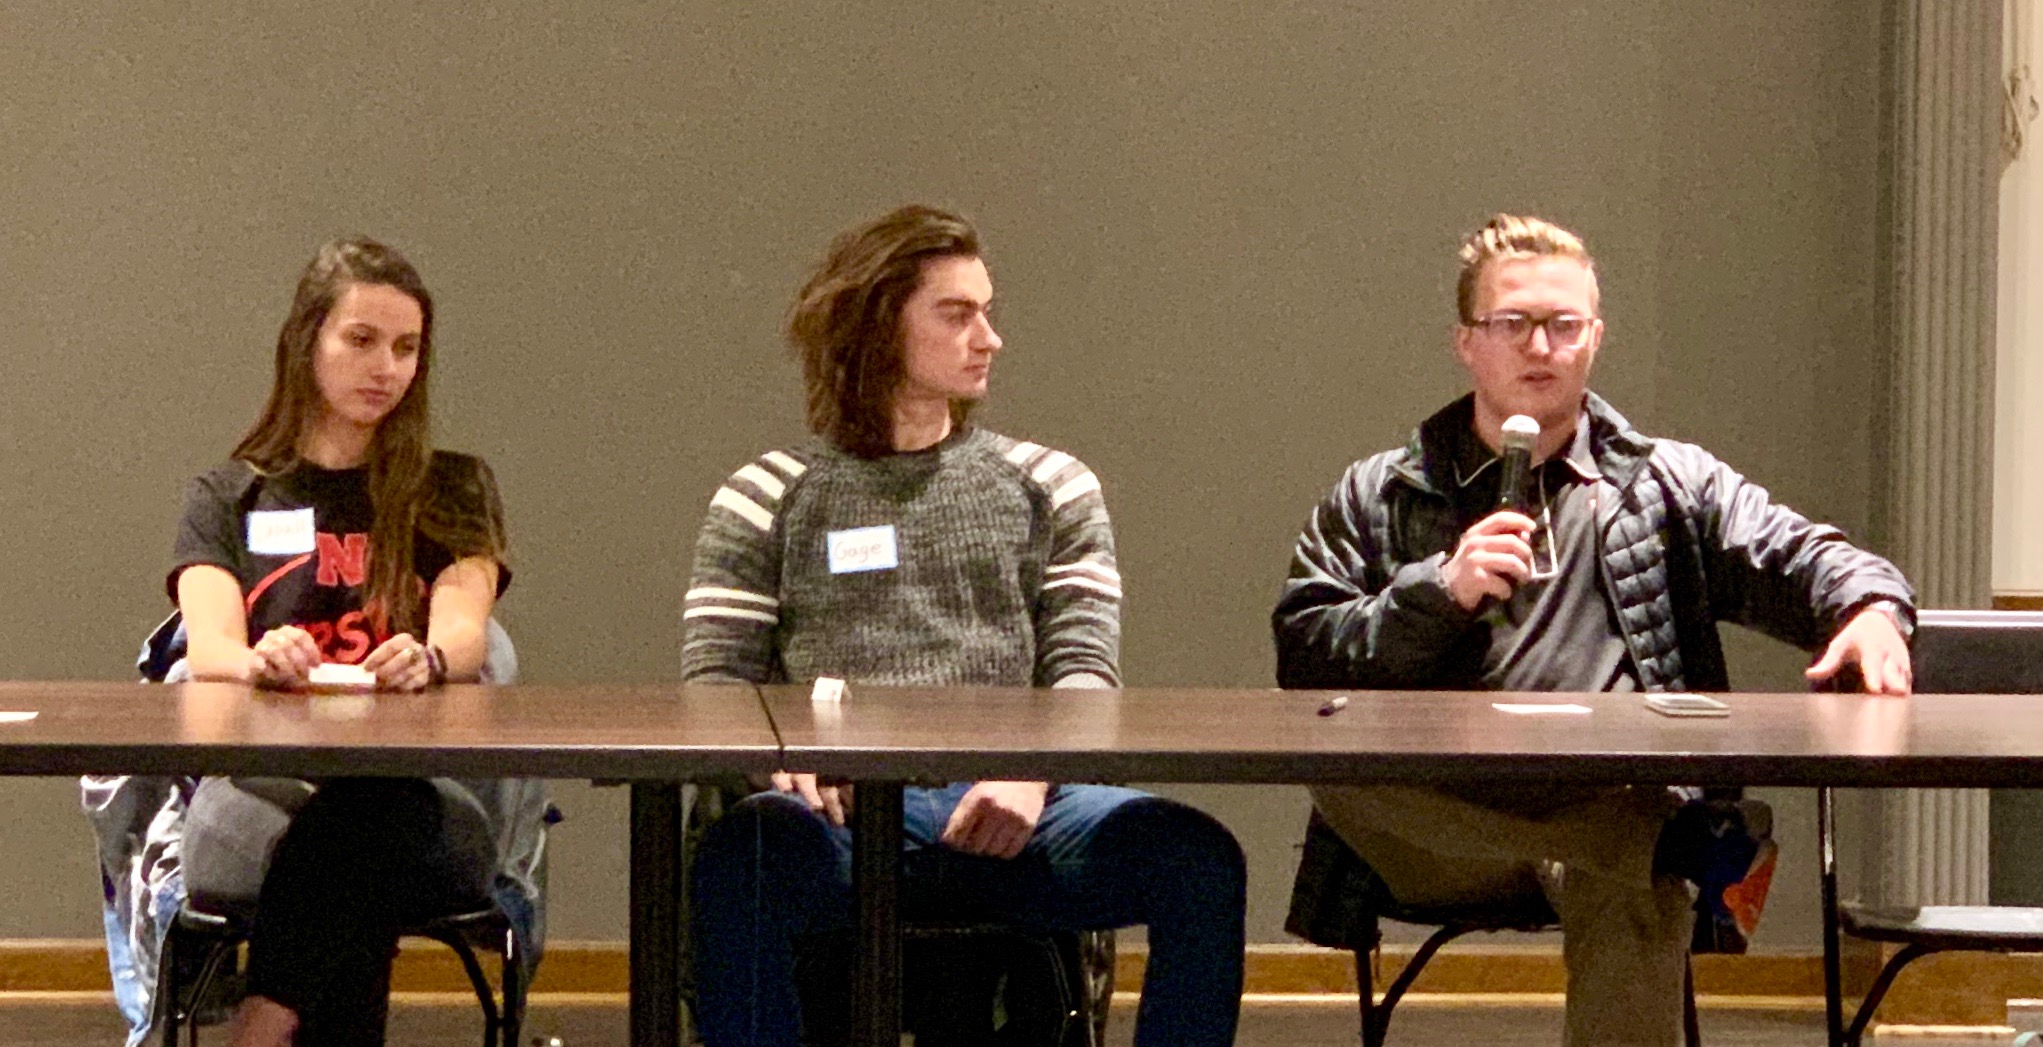 Education abroad returnees Sarah Weisbecker, Gage Mruz and Hunter Kelley share about their experiences interning abroad during the International Education Week panel.